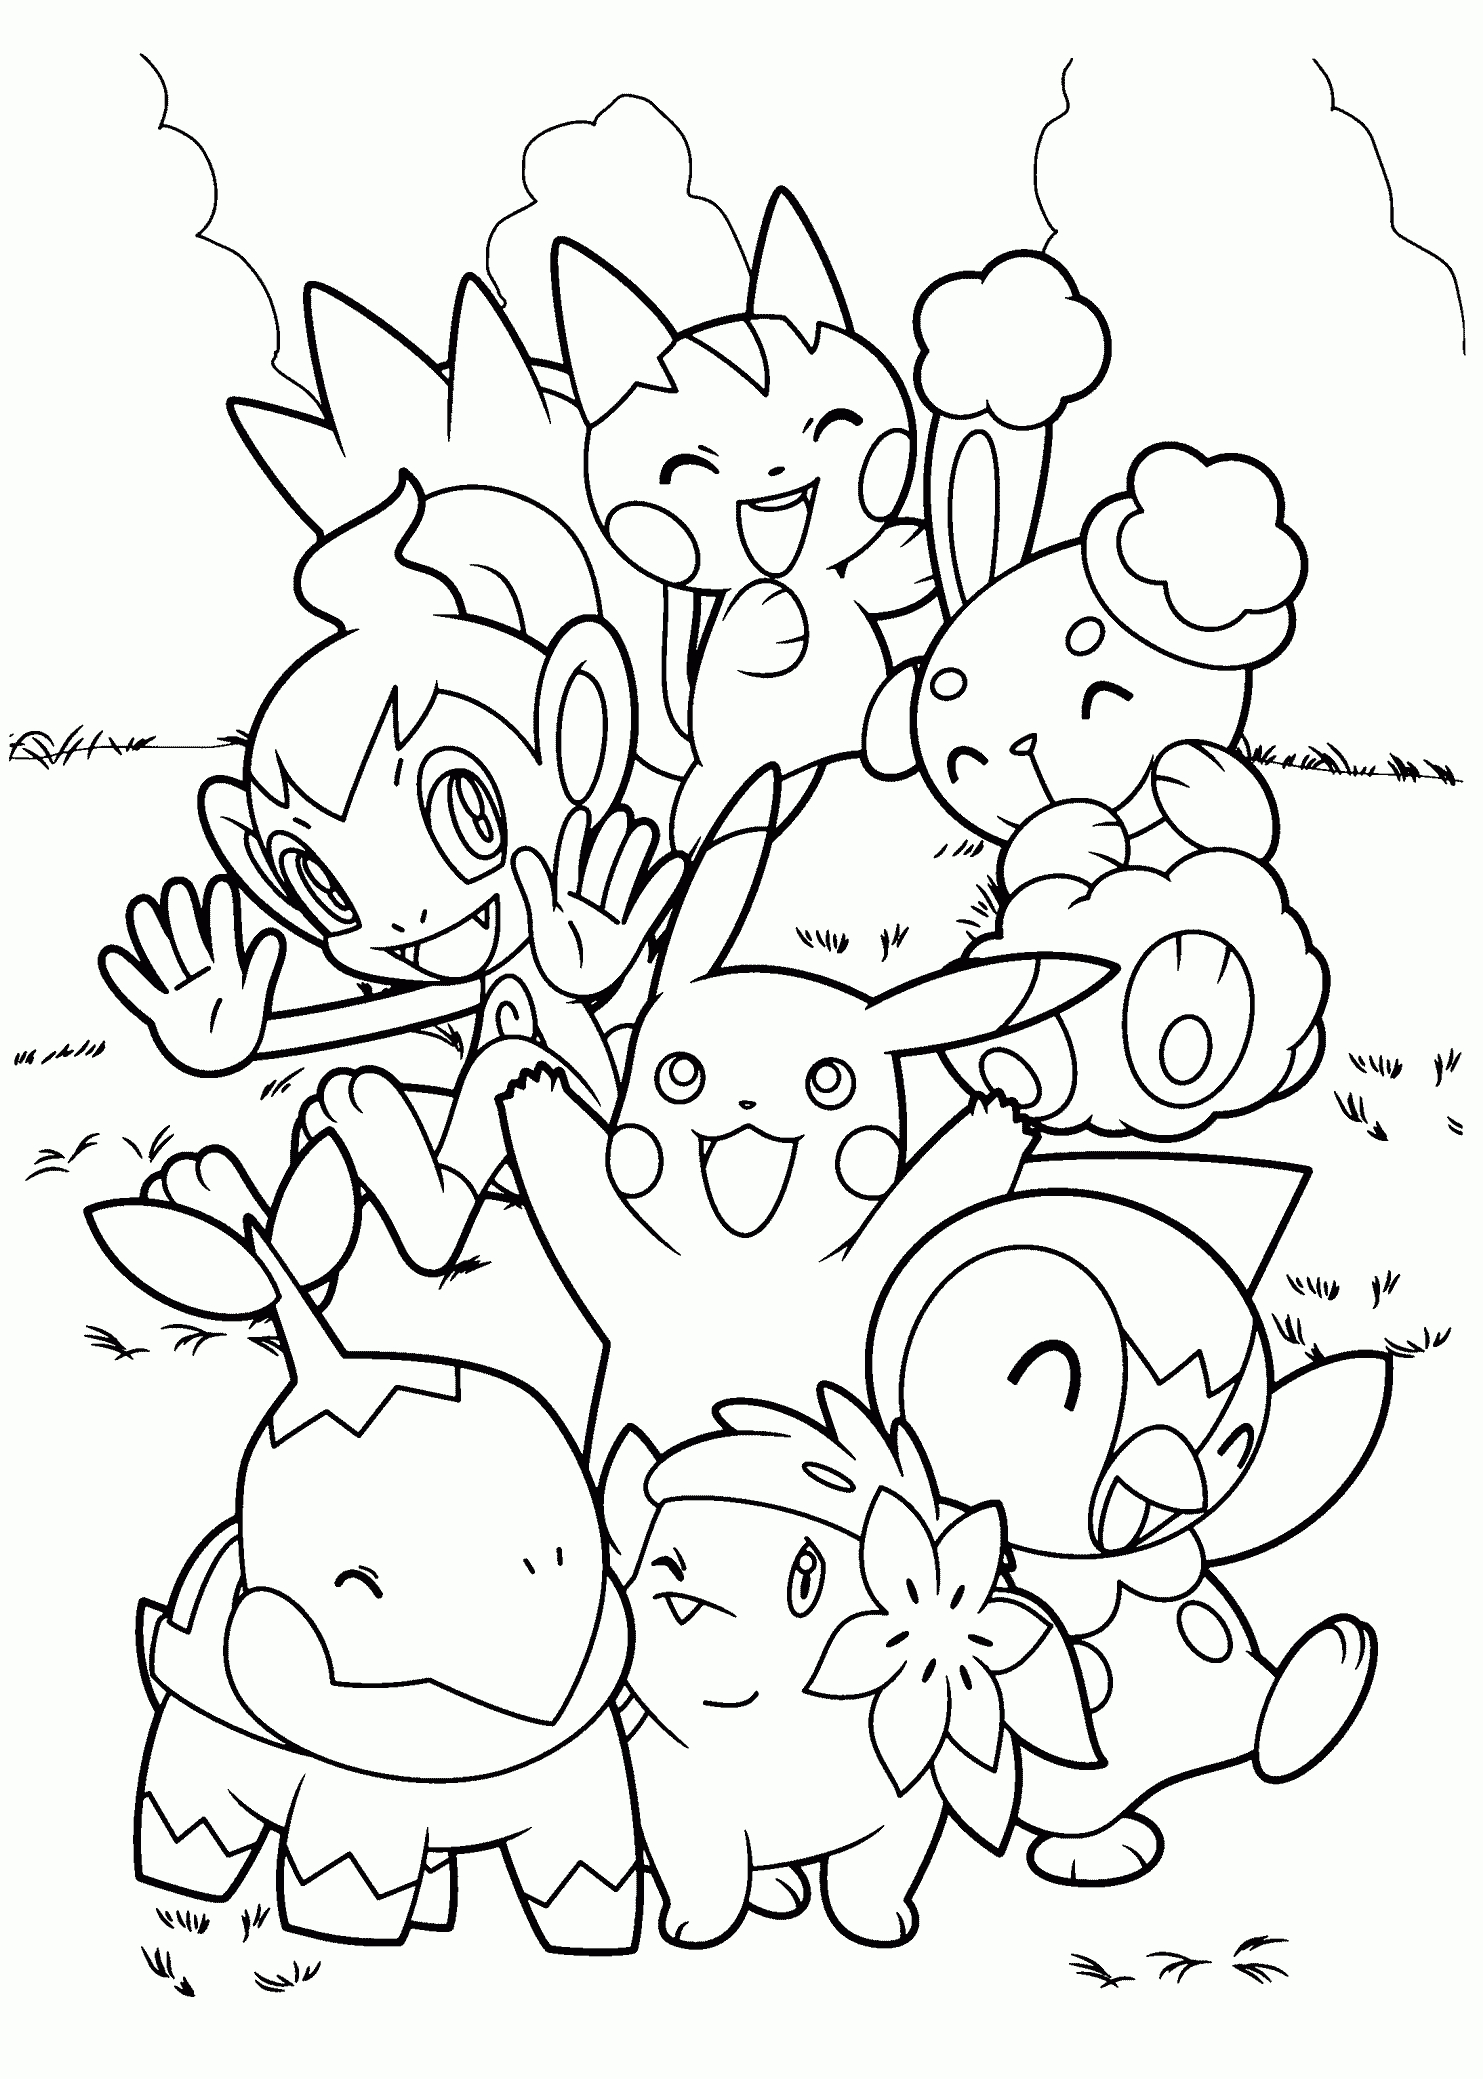 Top 90 Free Printable Pokemon Coloring Pages Online | Pokemon - Free Printable Pokemon Coloring Pages